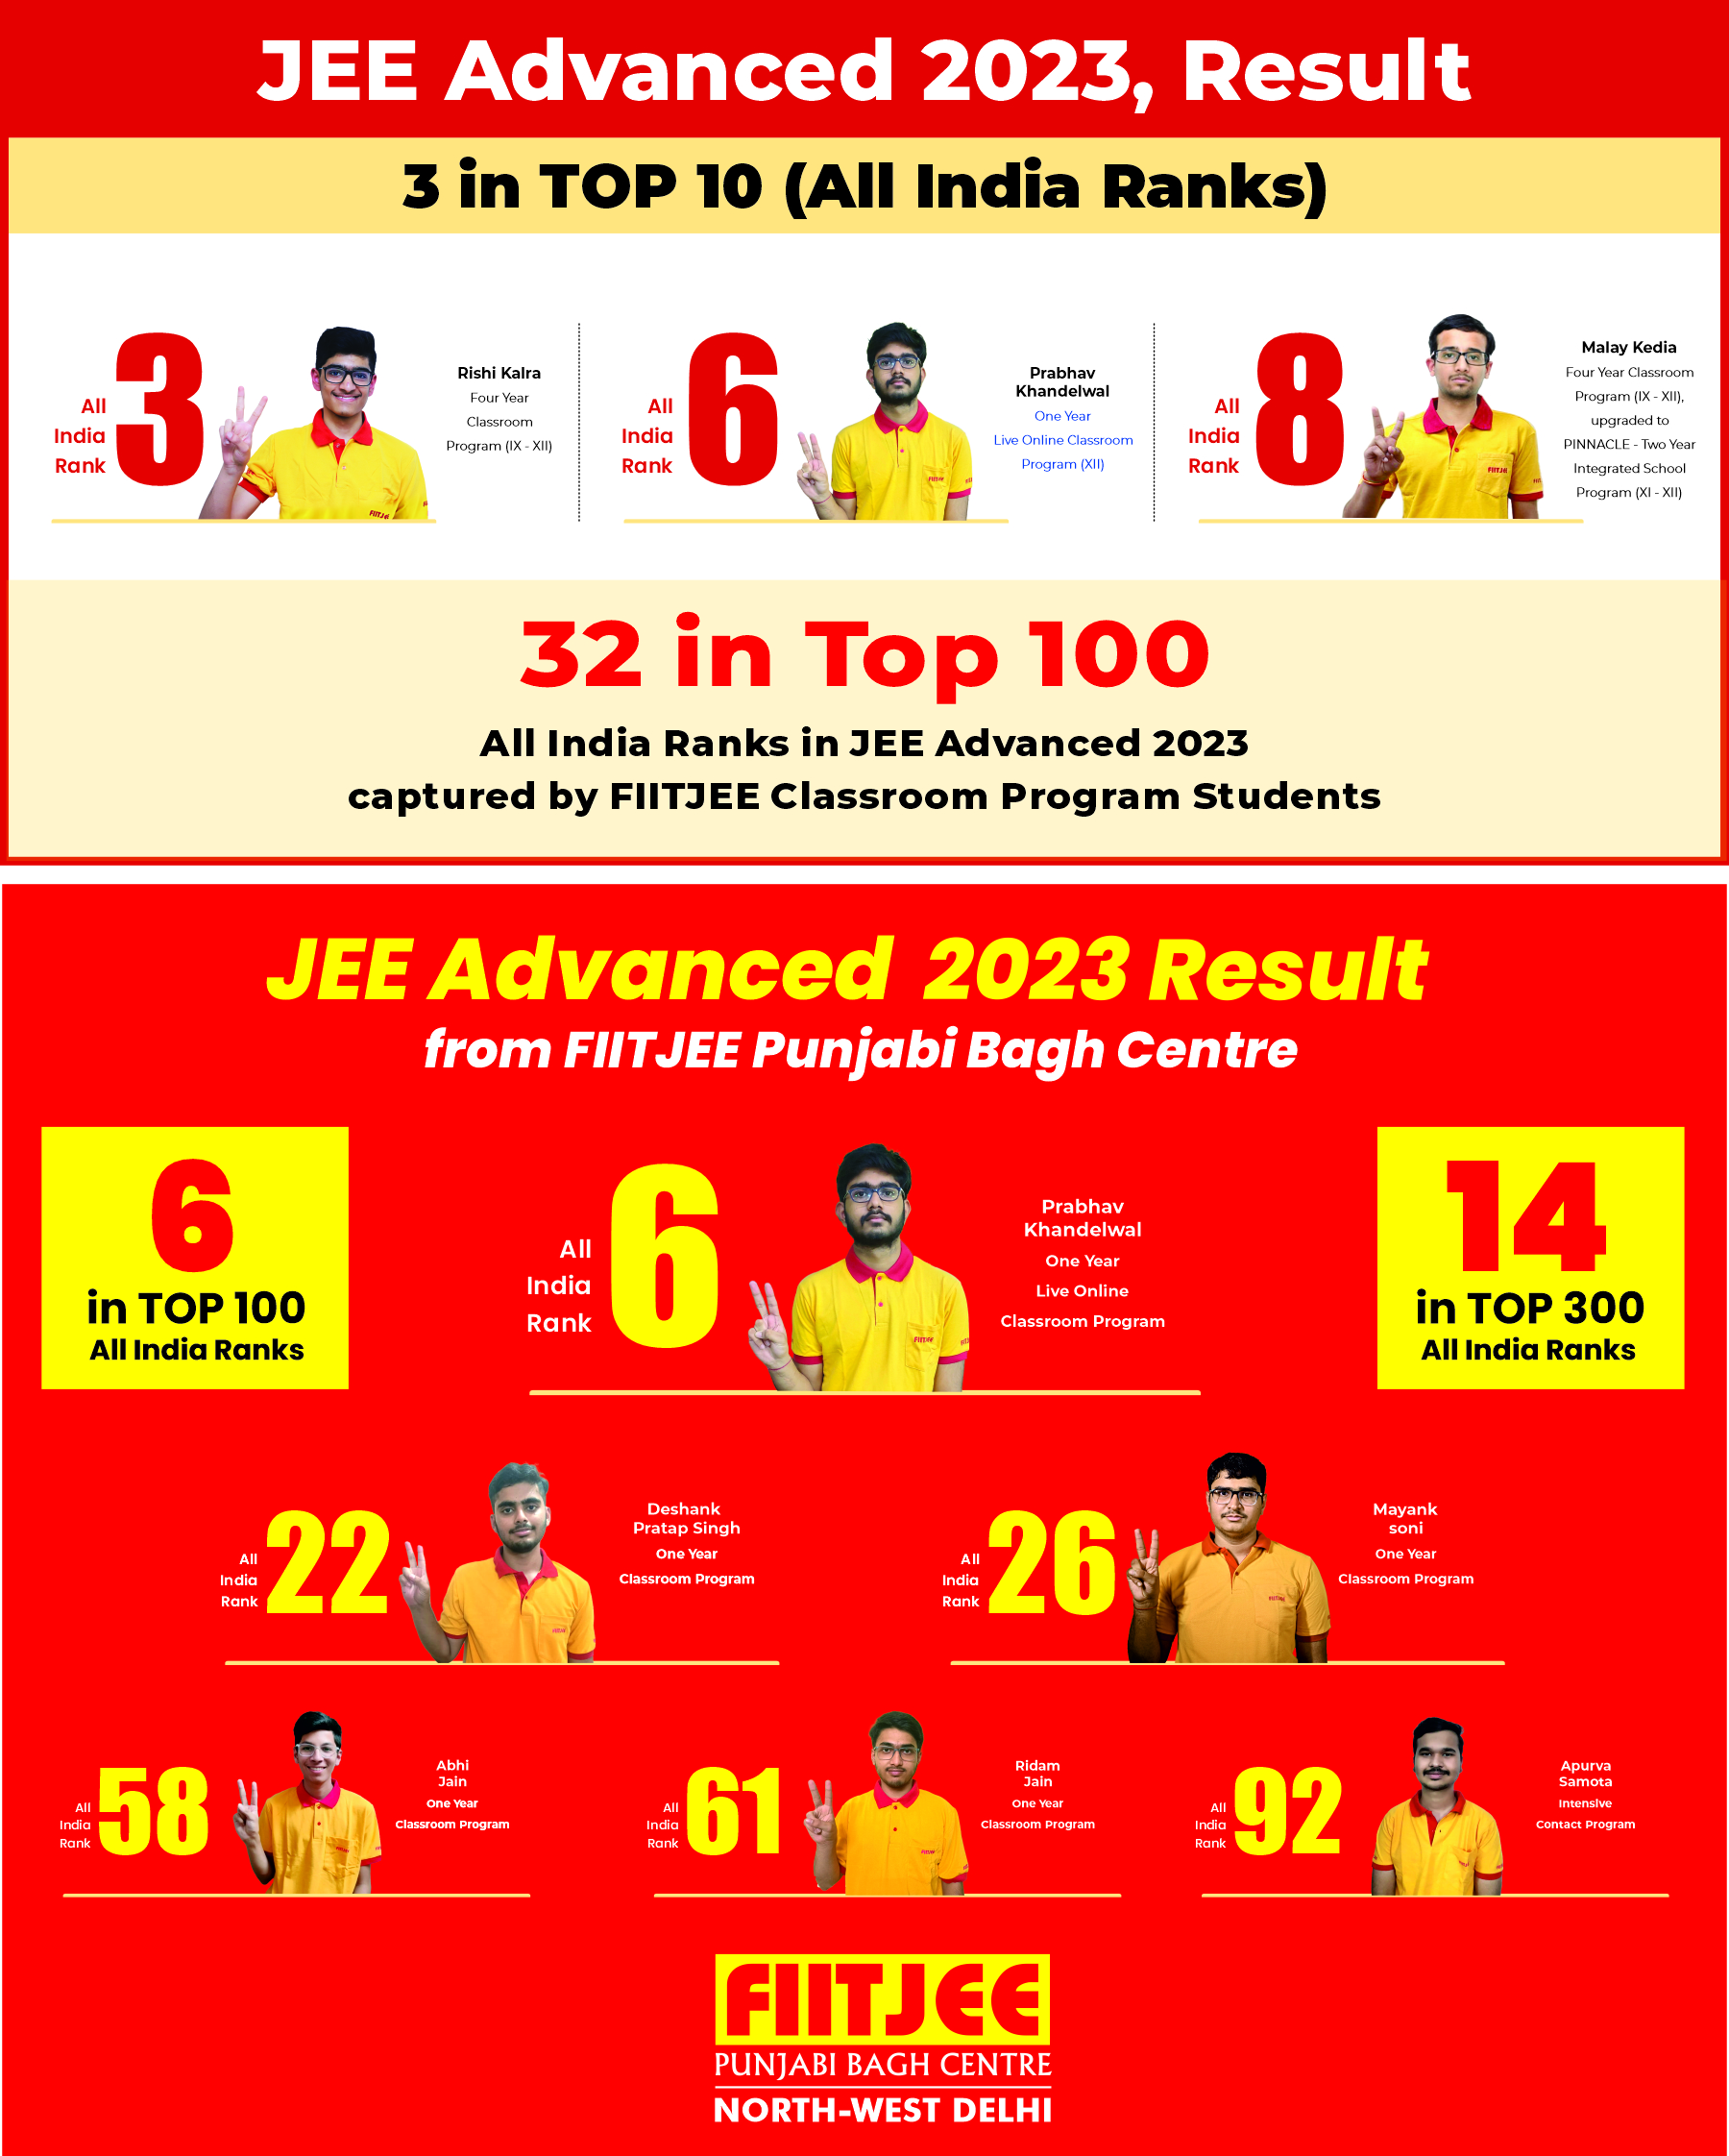 Textbooks | FIITJEE Study Material Phase 1 - Misc. | Freeup